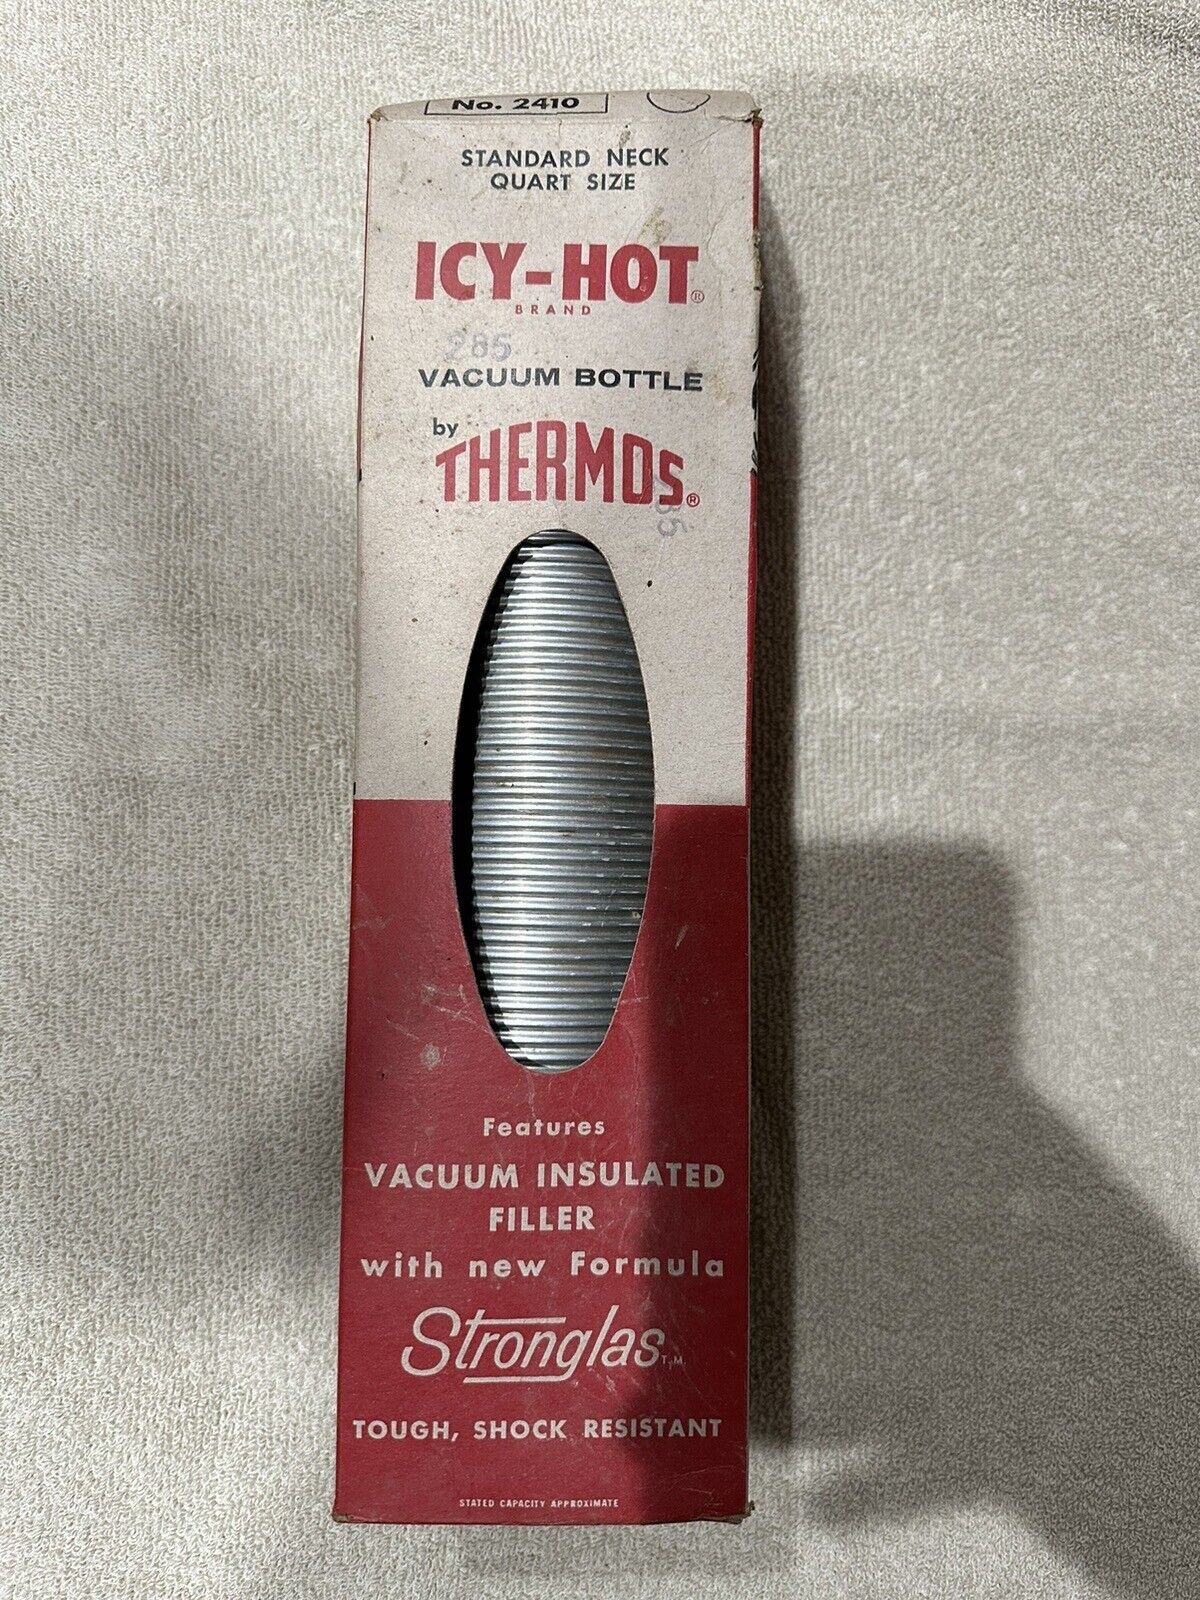 Icy-Hot By Thermos Vacuum Thermos Bottle #2410